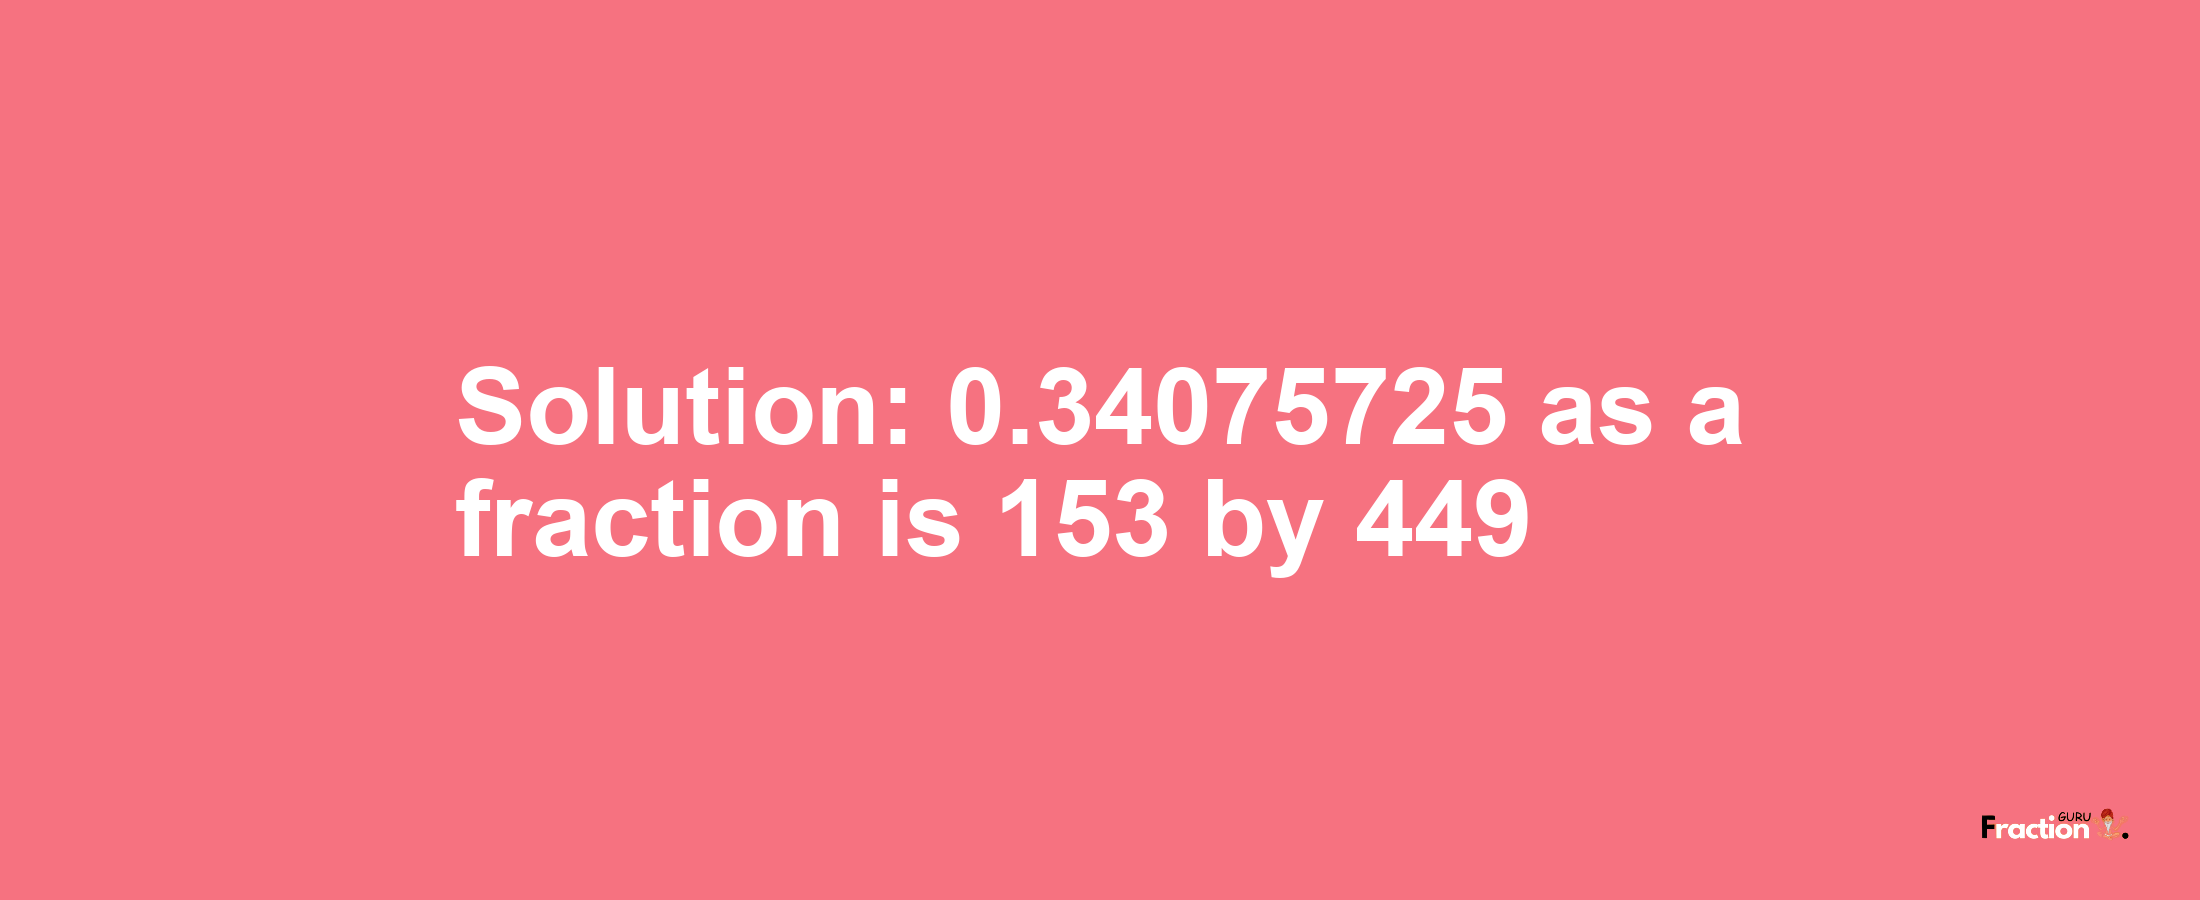 Solution:0.34075725 as a fraction is 153/449